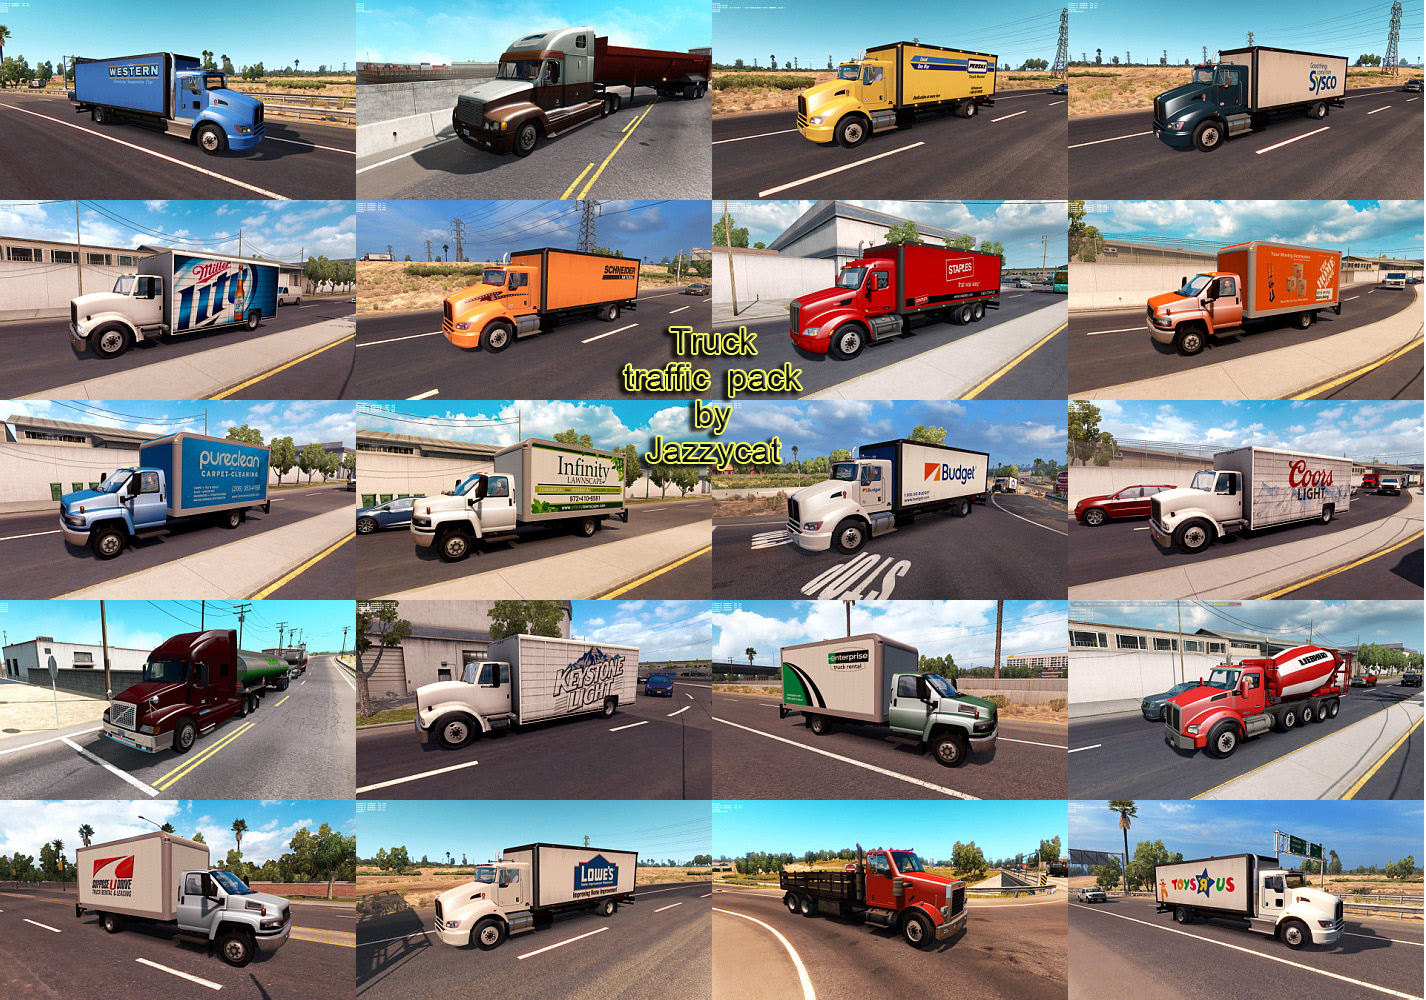 truck_traffic_pack_by_Jazzycat_v1.9_ats